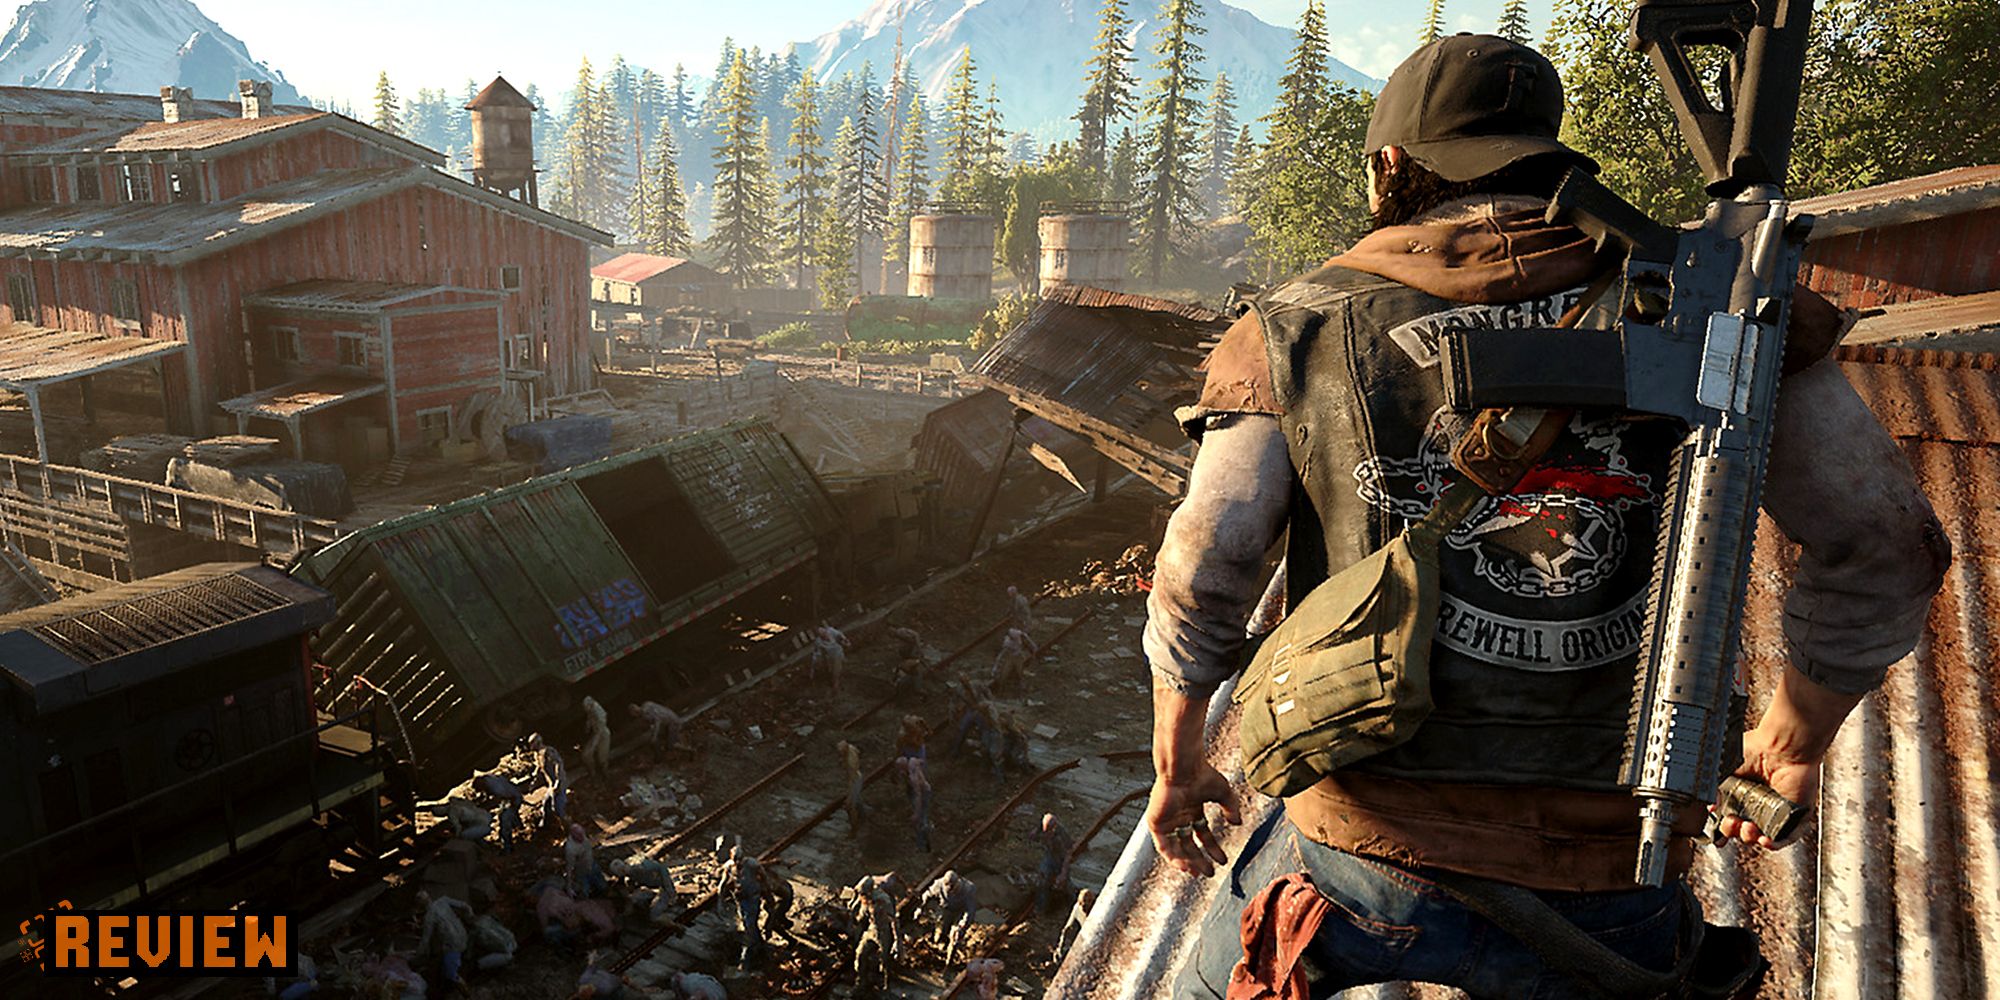 Days Gone (PC) Review - Perfectly Average